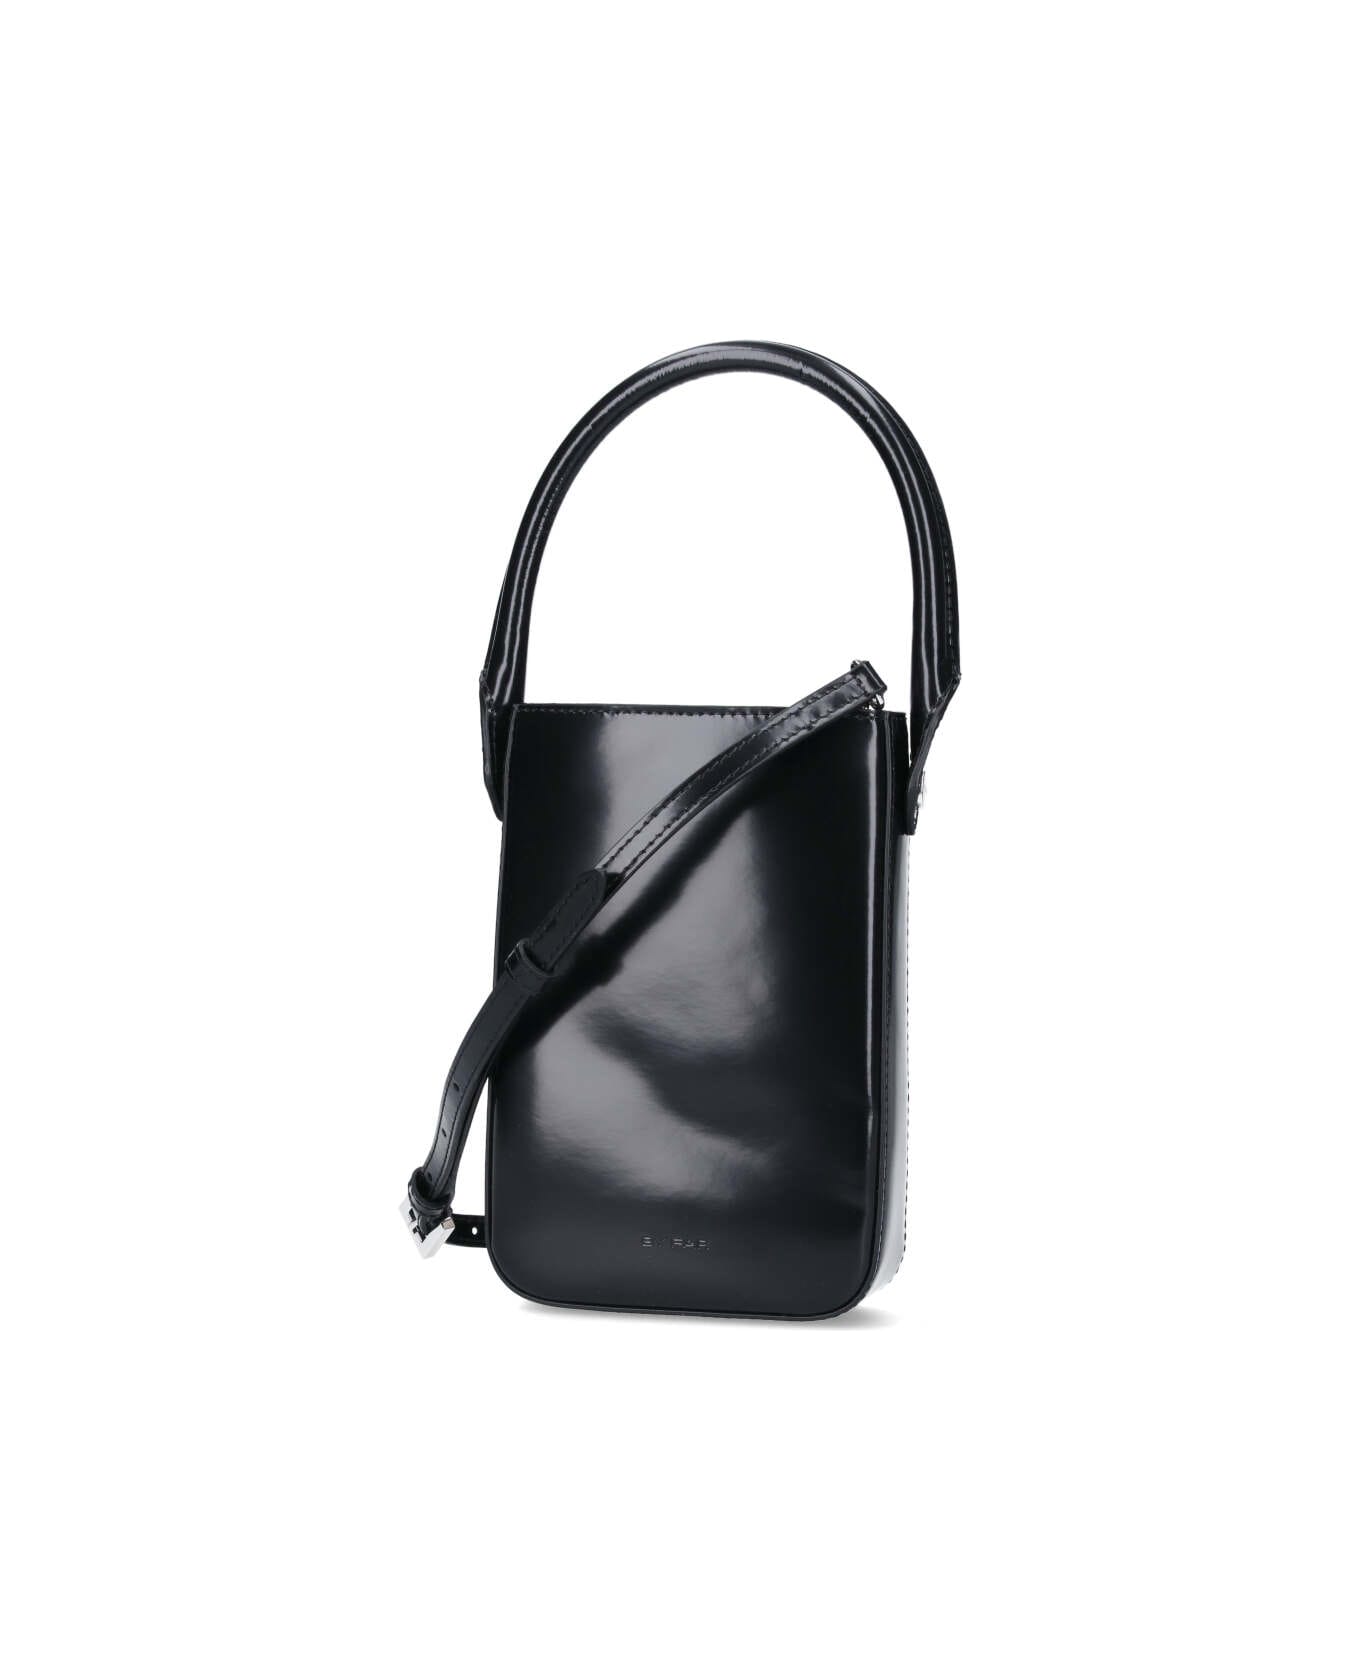 BY FAR Mini Tote Bag "the Note" - Black   トートバッグ